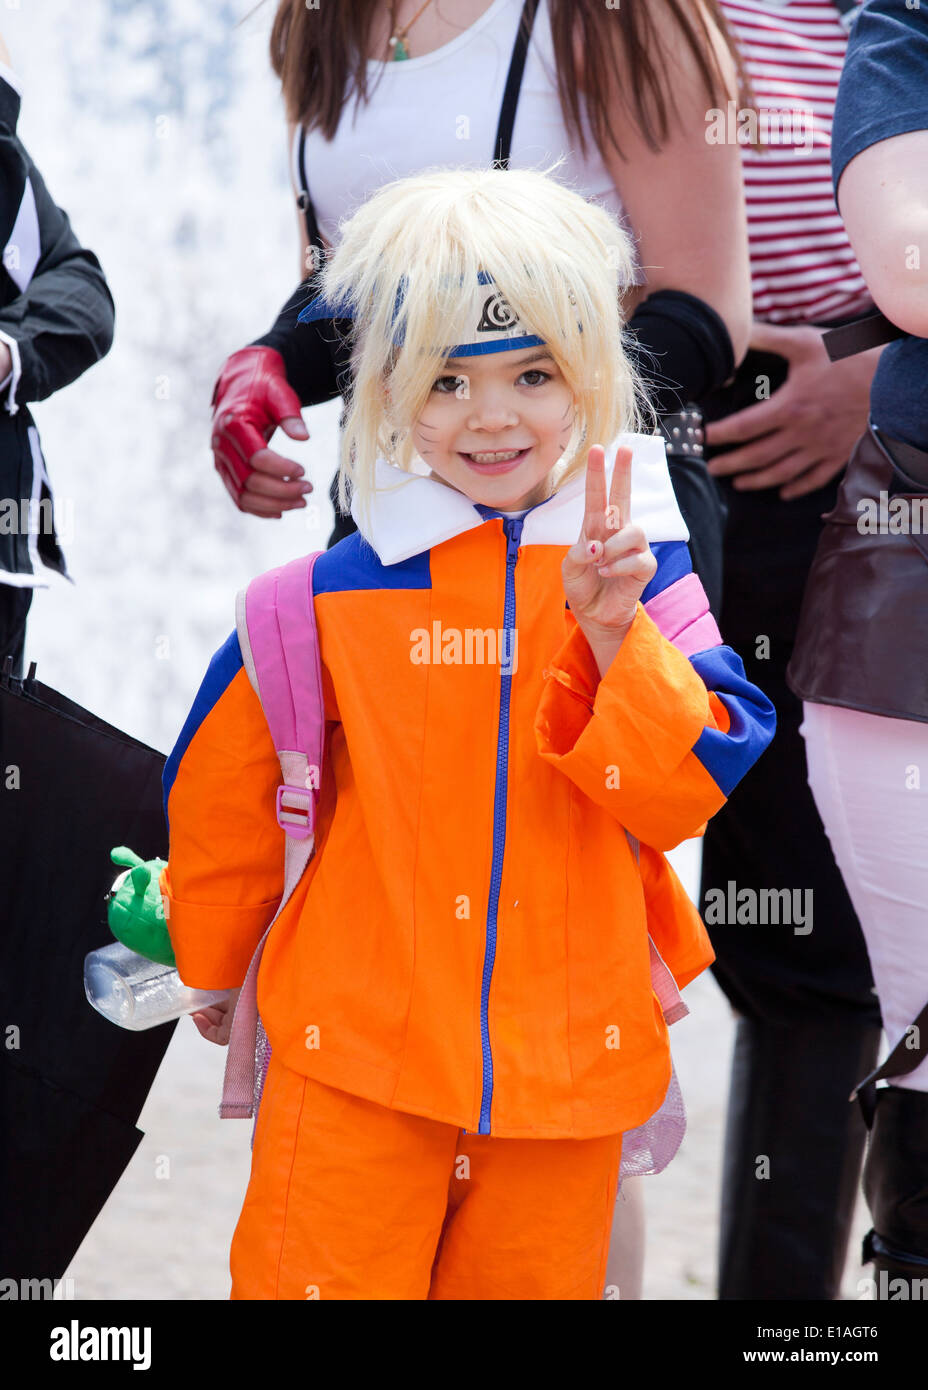 Girl dressed as an anime character, making peace sign - USA Stock Photo -  Alamy